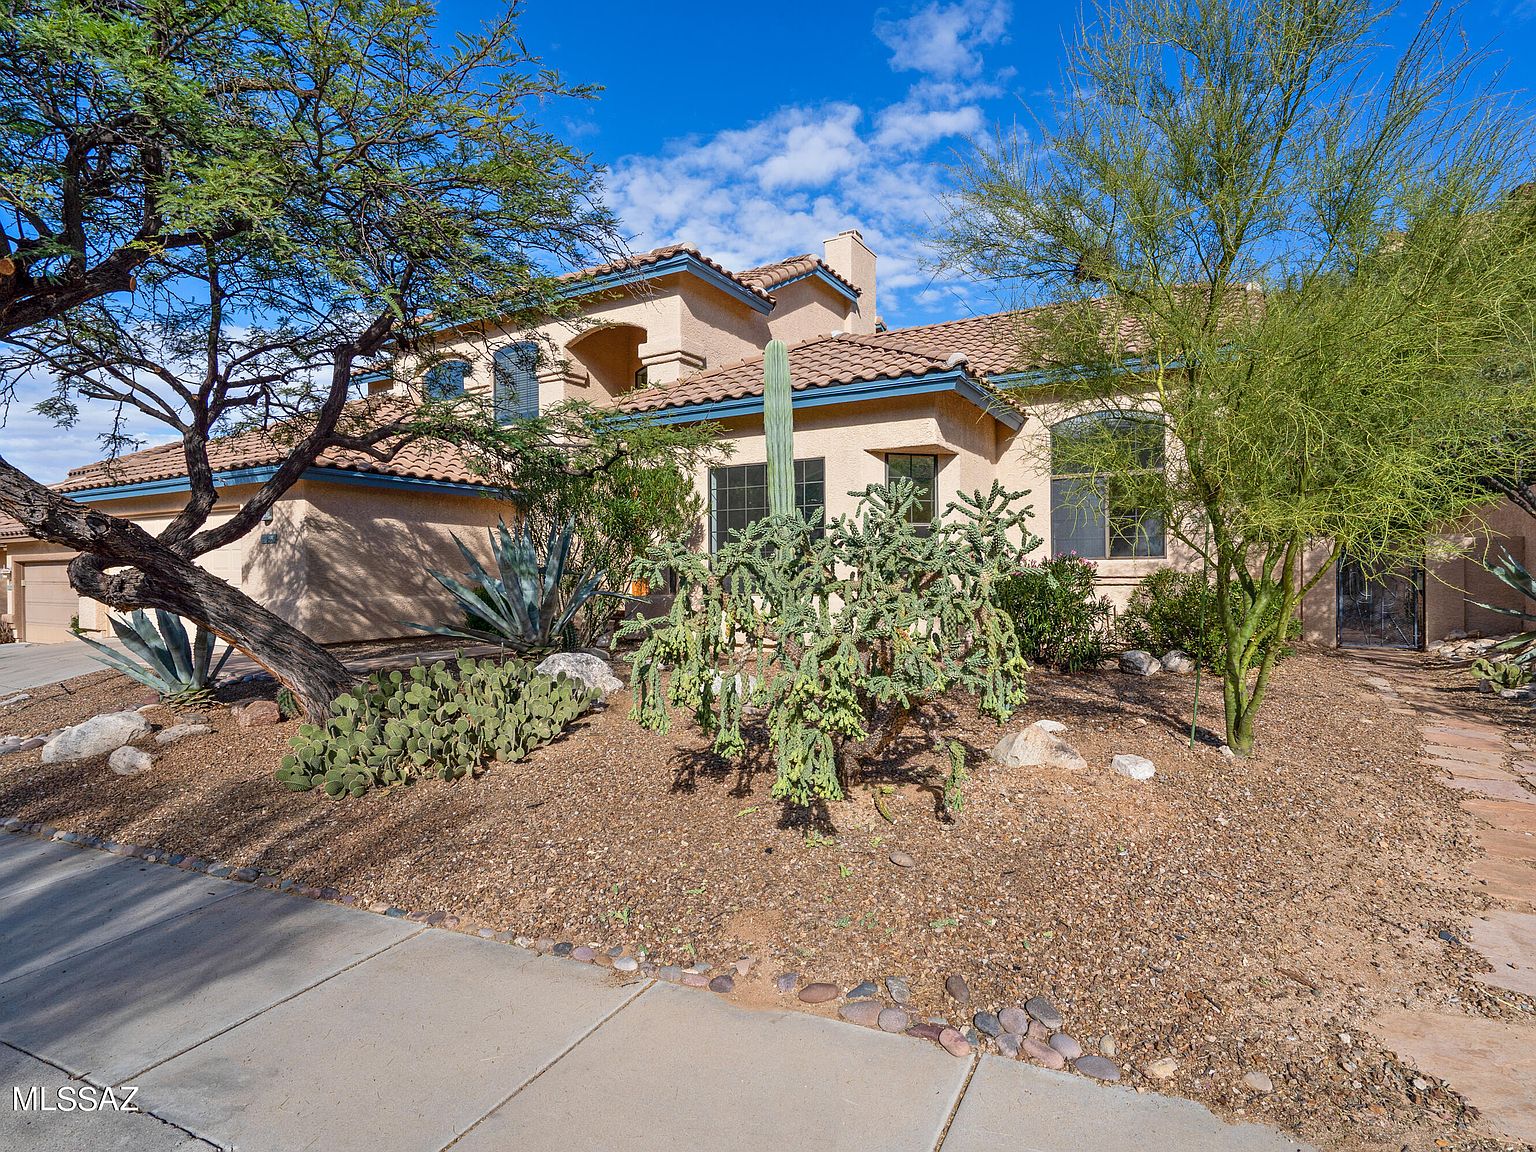 8' Doors - Oro Valley Real Estate - 6 Homes For Sale - Zillow